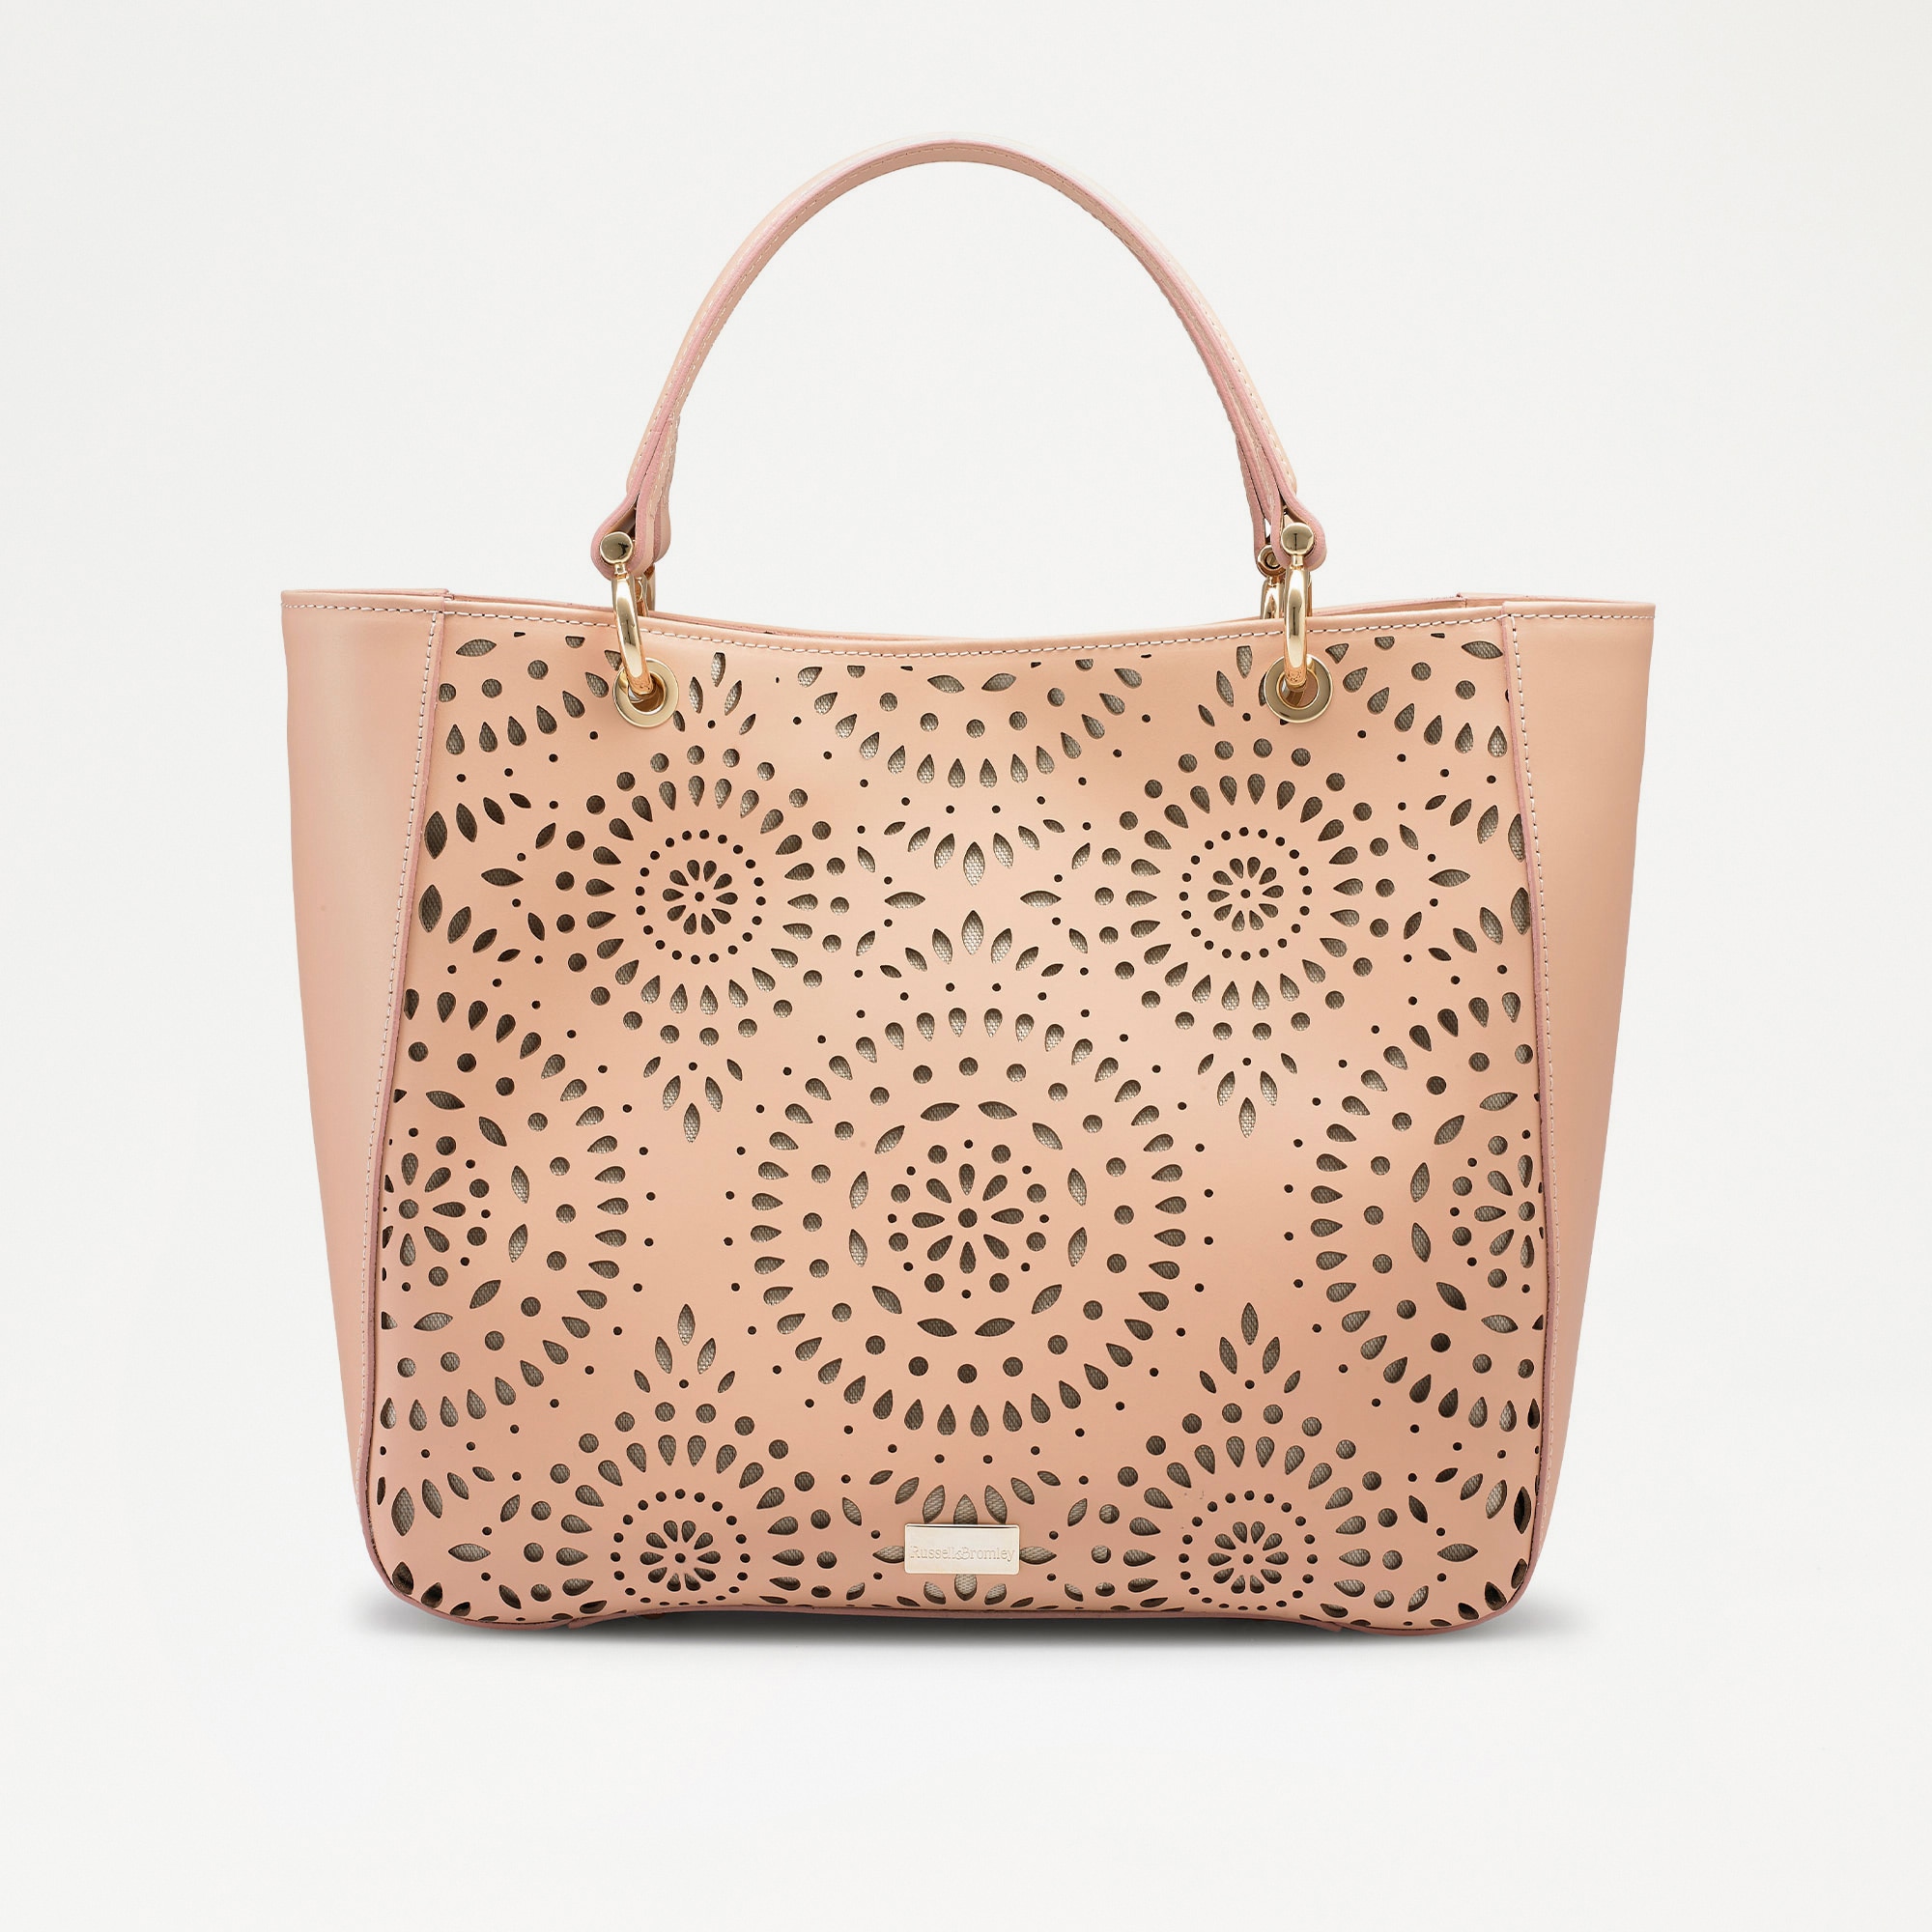 Russell & Bromley Women's Pink Leather Laser Cut Morocco Tote Bag